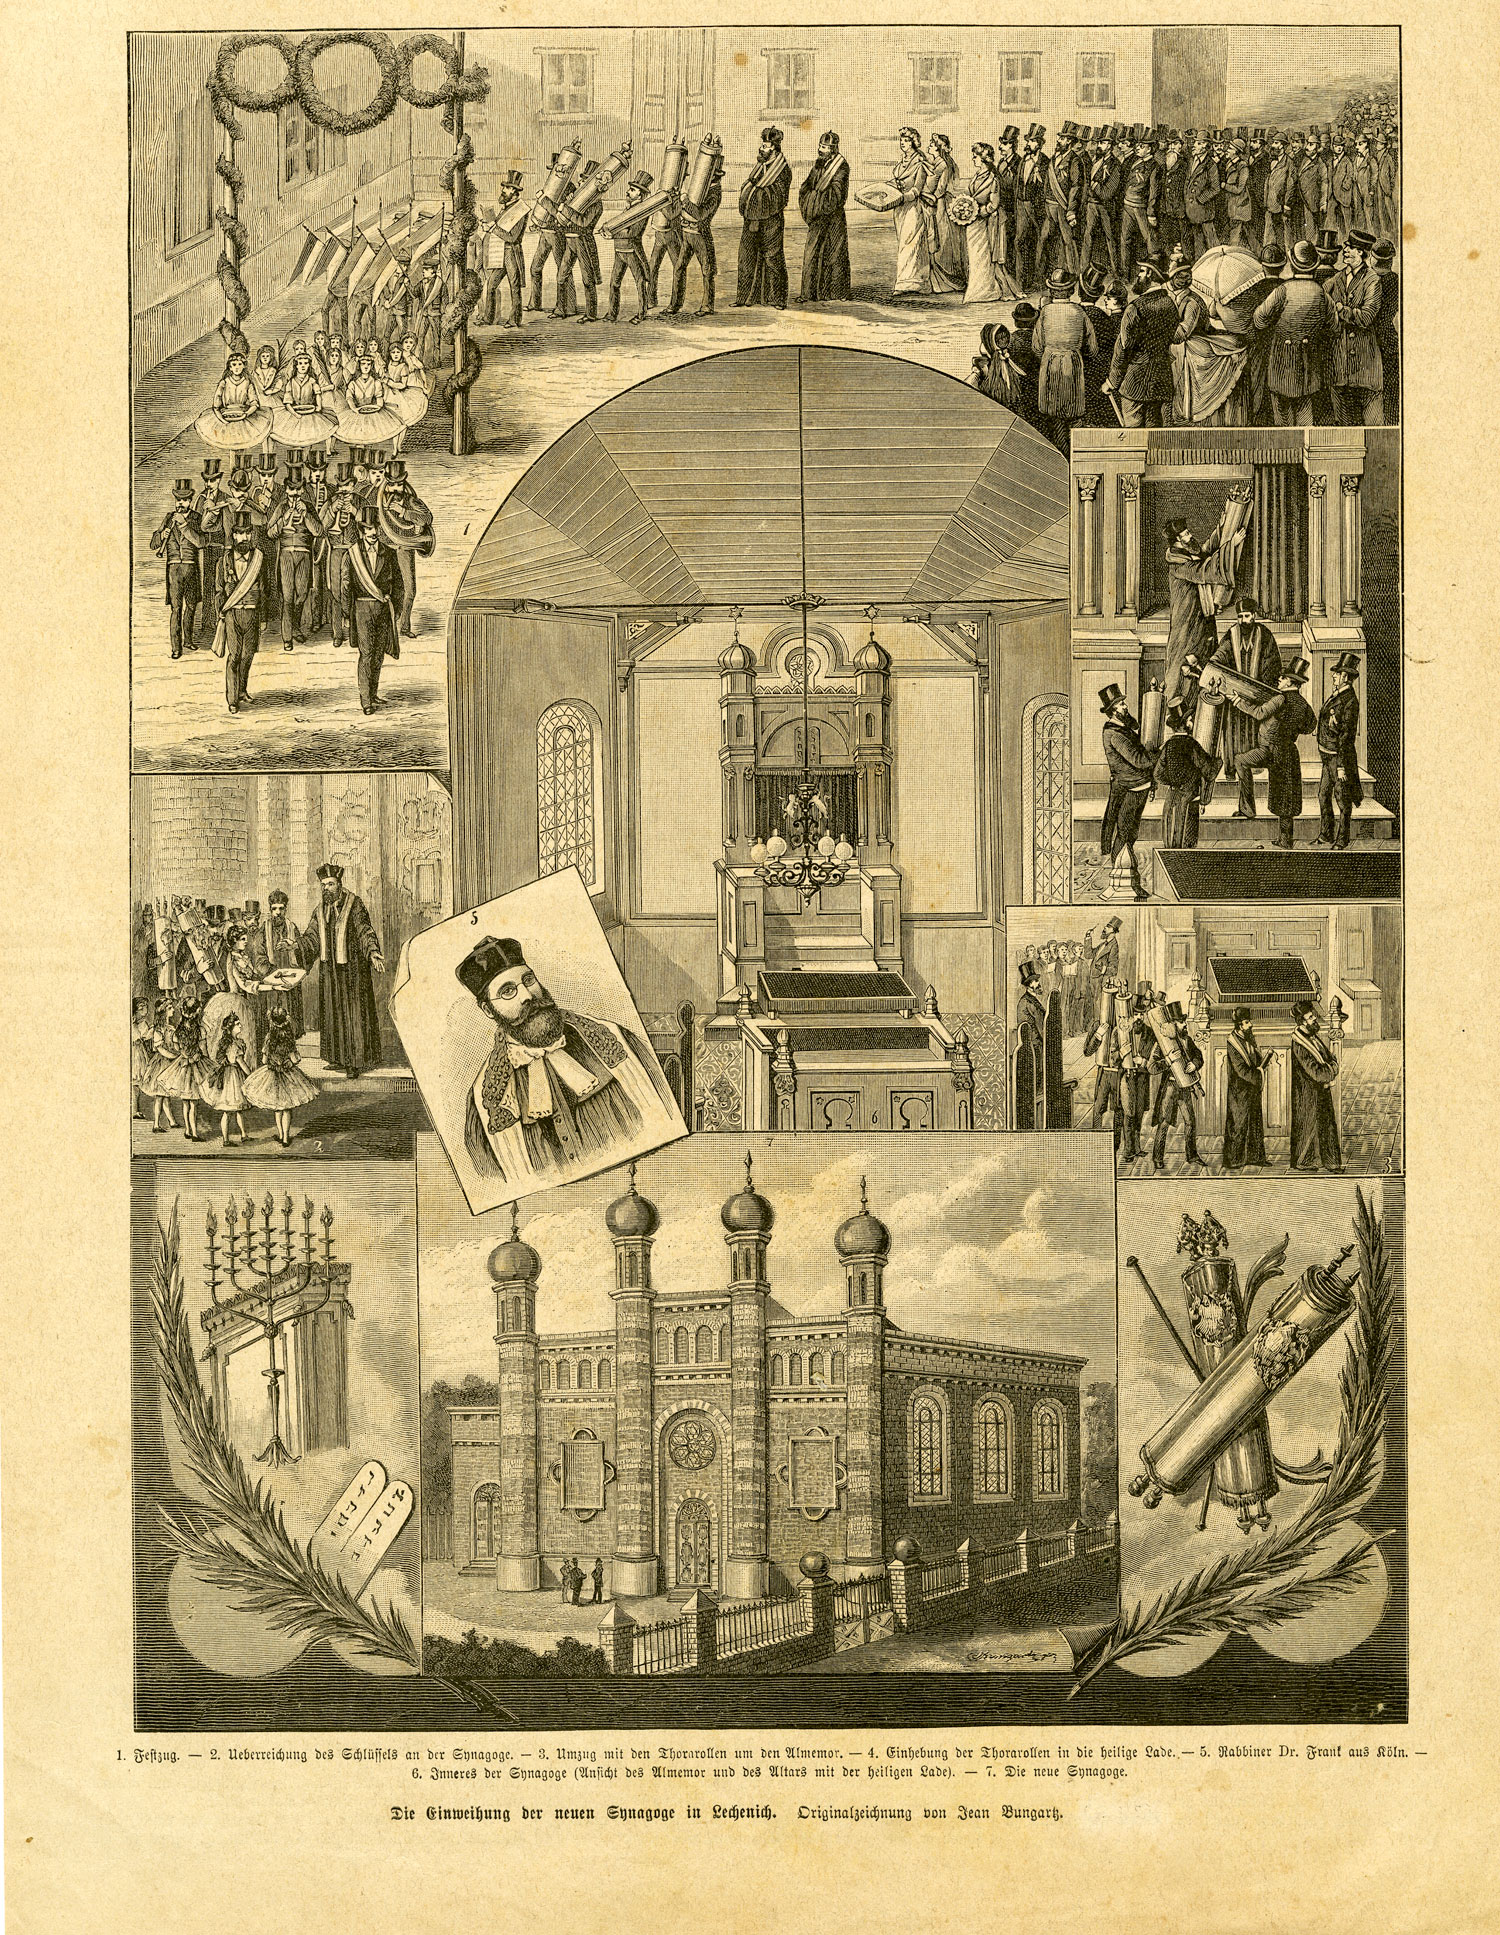 Line illustration by Bungartz showing several views of the Lechenich synagogue